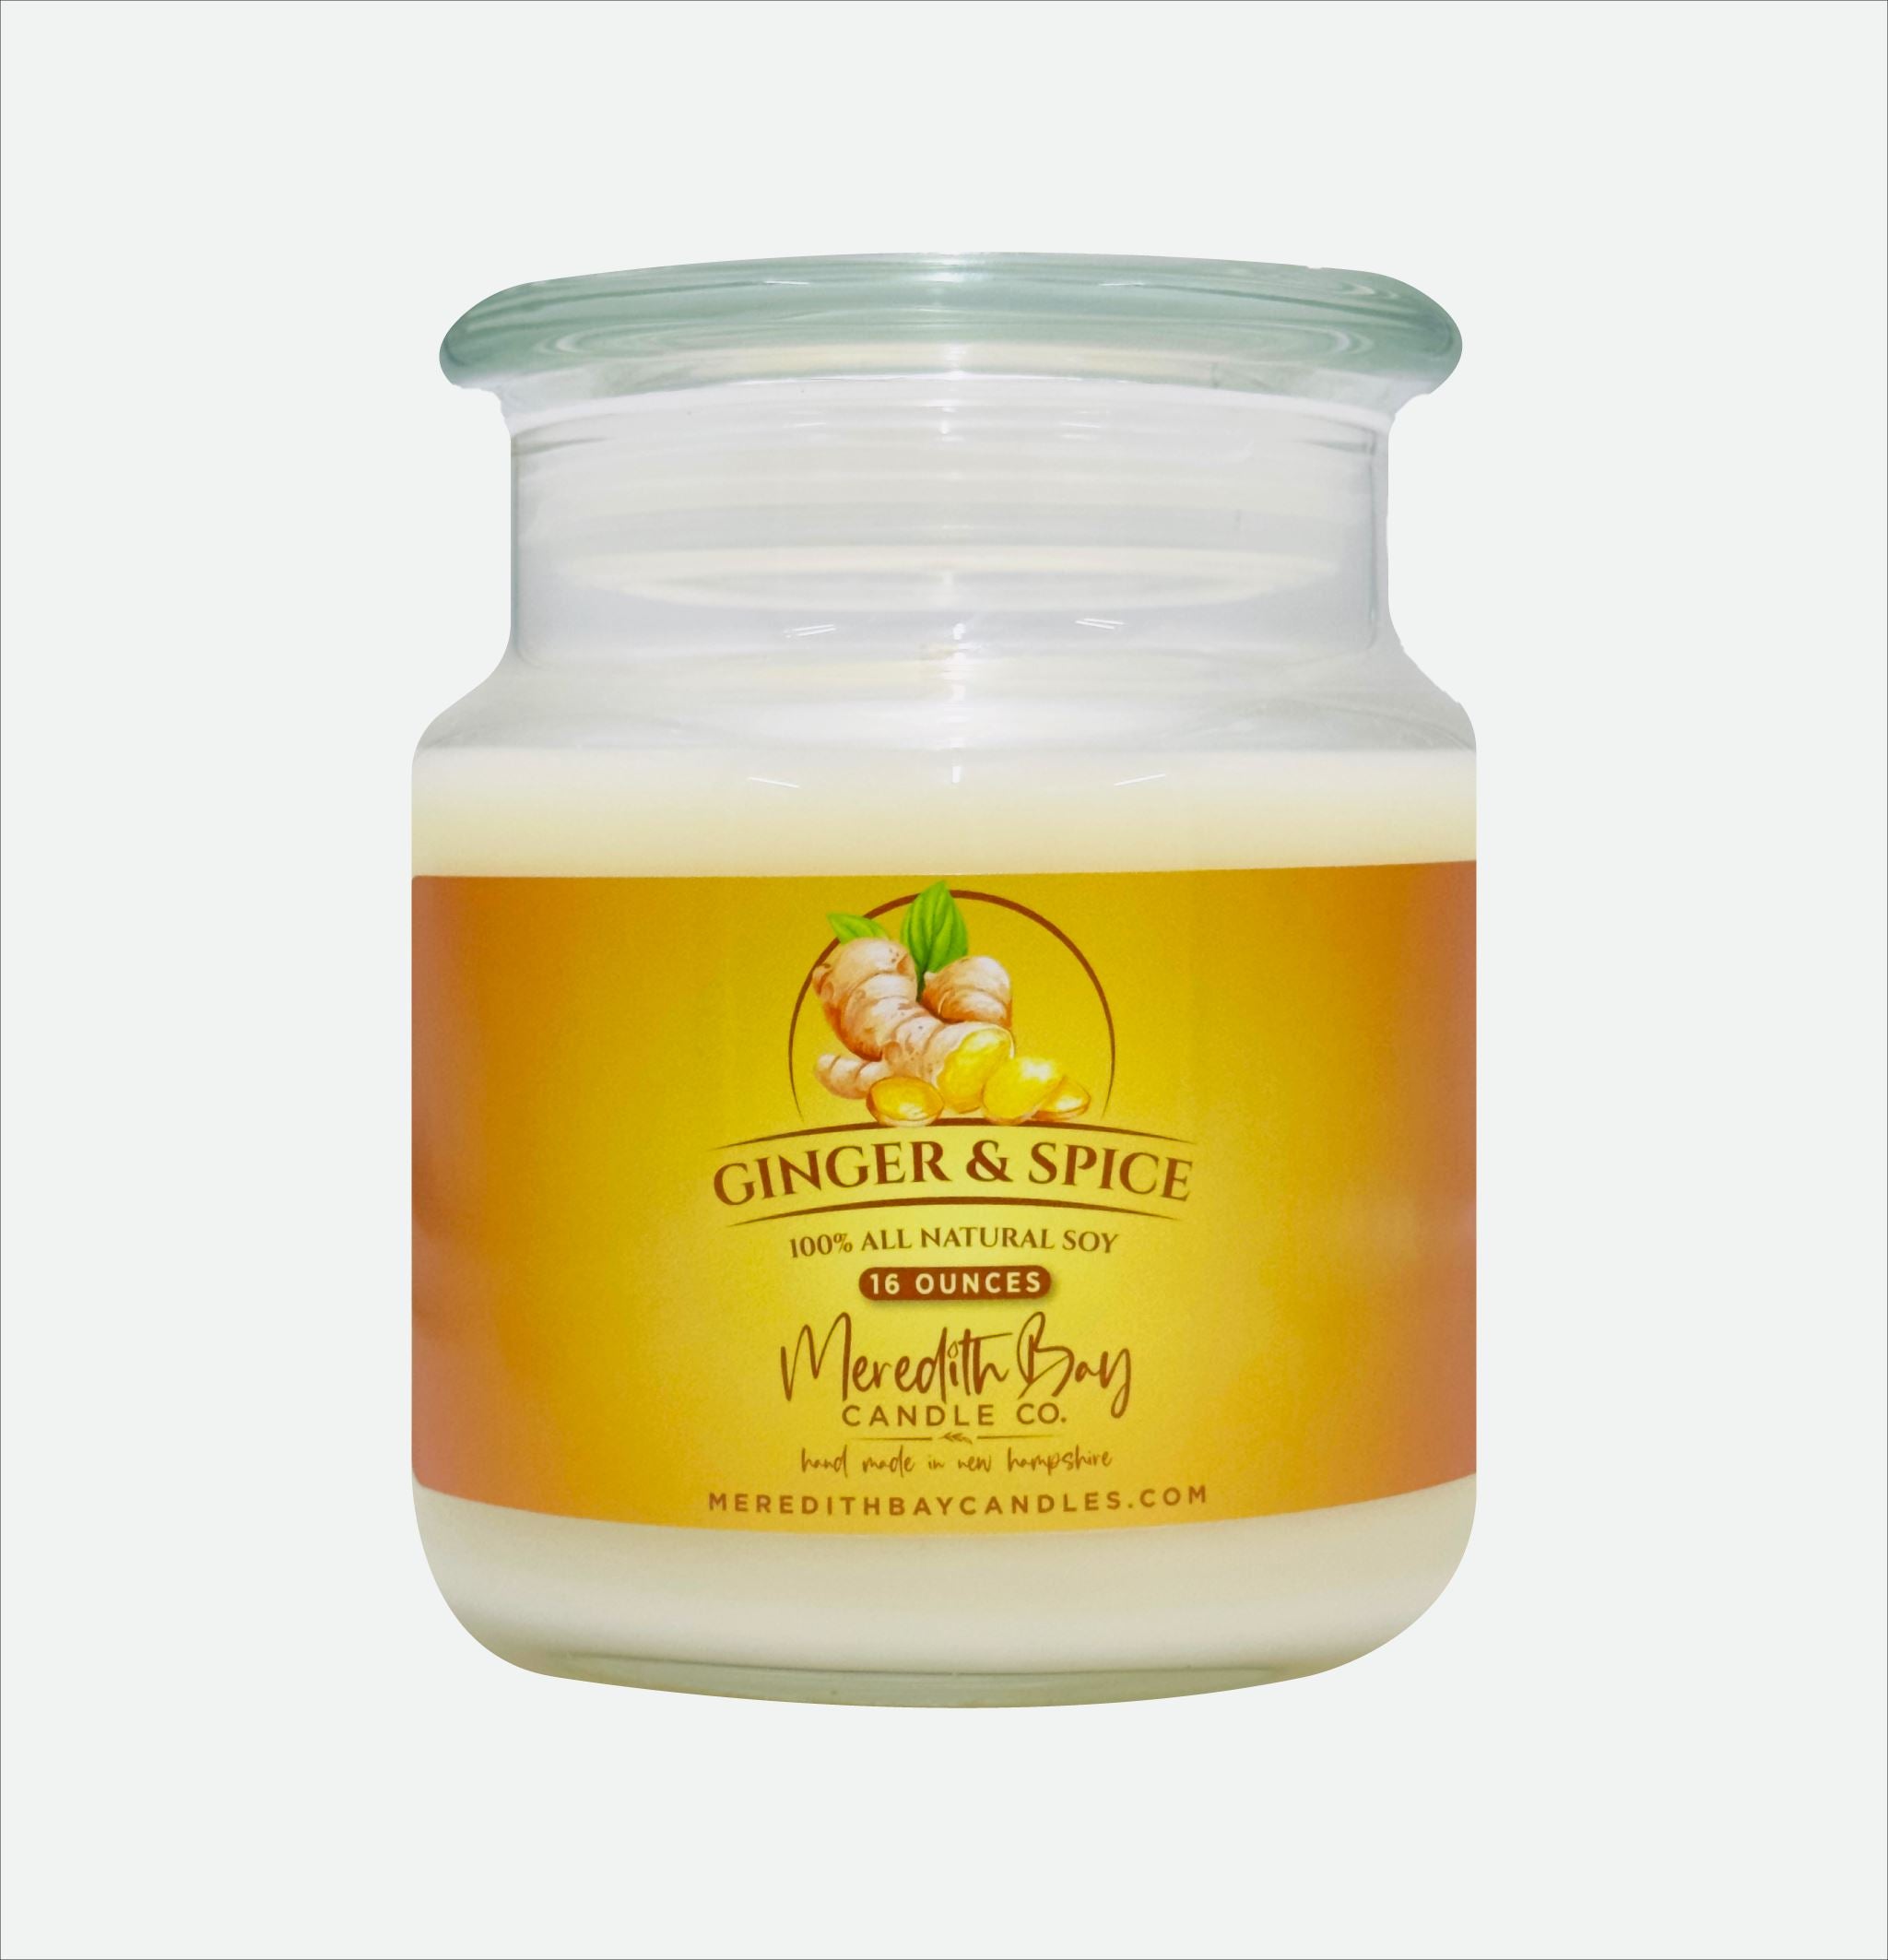 Ginger & Spice Soy Candle Meredith Bay Candle Co 16.0 Oz 